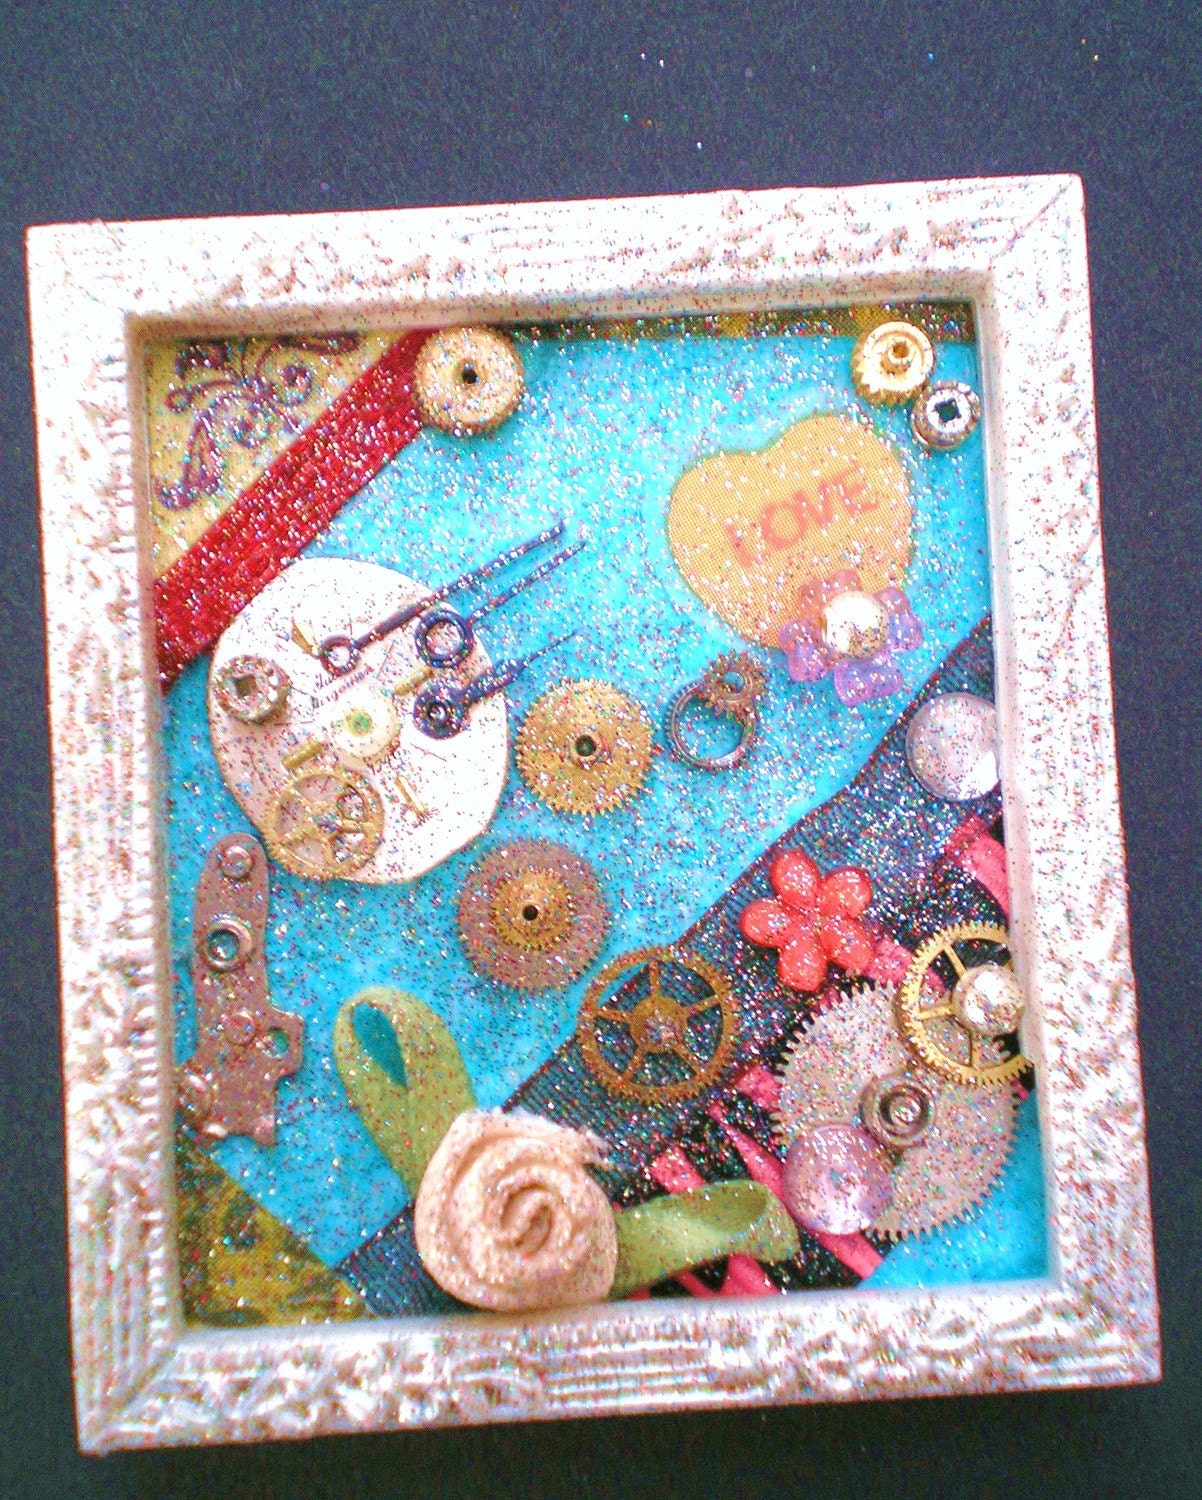 No Other Thought - Tiny Collage Mixed Media OOAK Framed Signed with Jewels Satin Flower Heart Ribbon Watch Parts